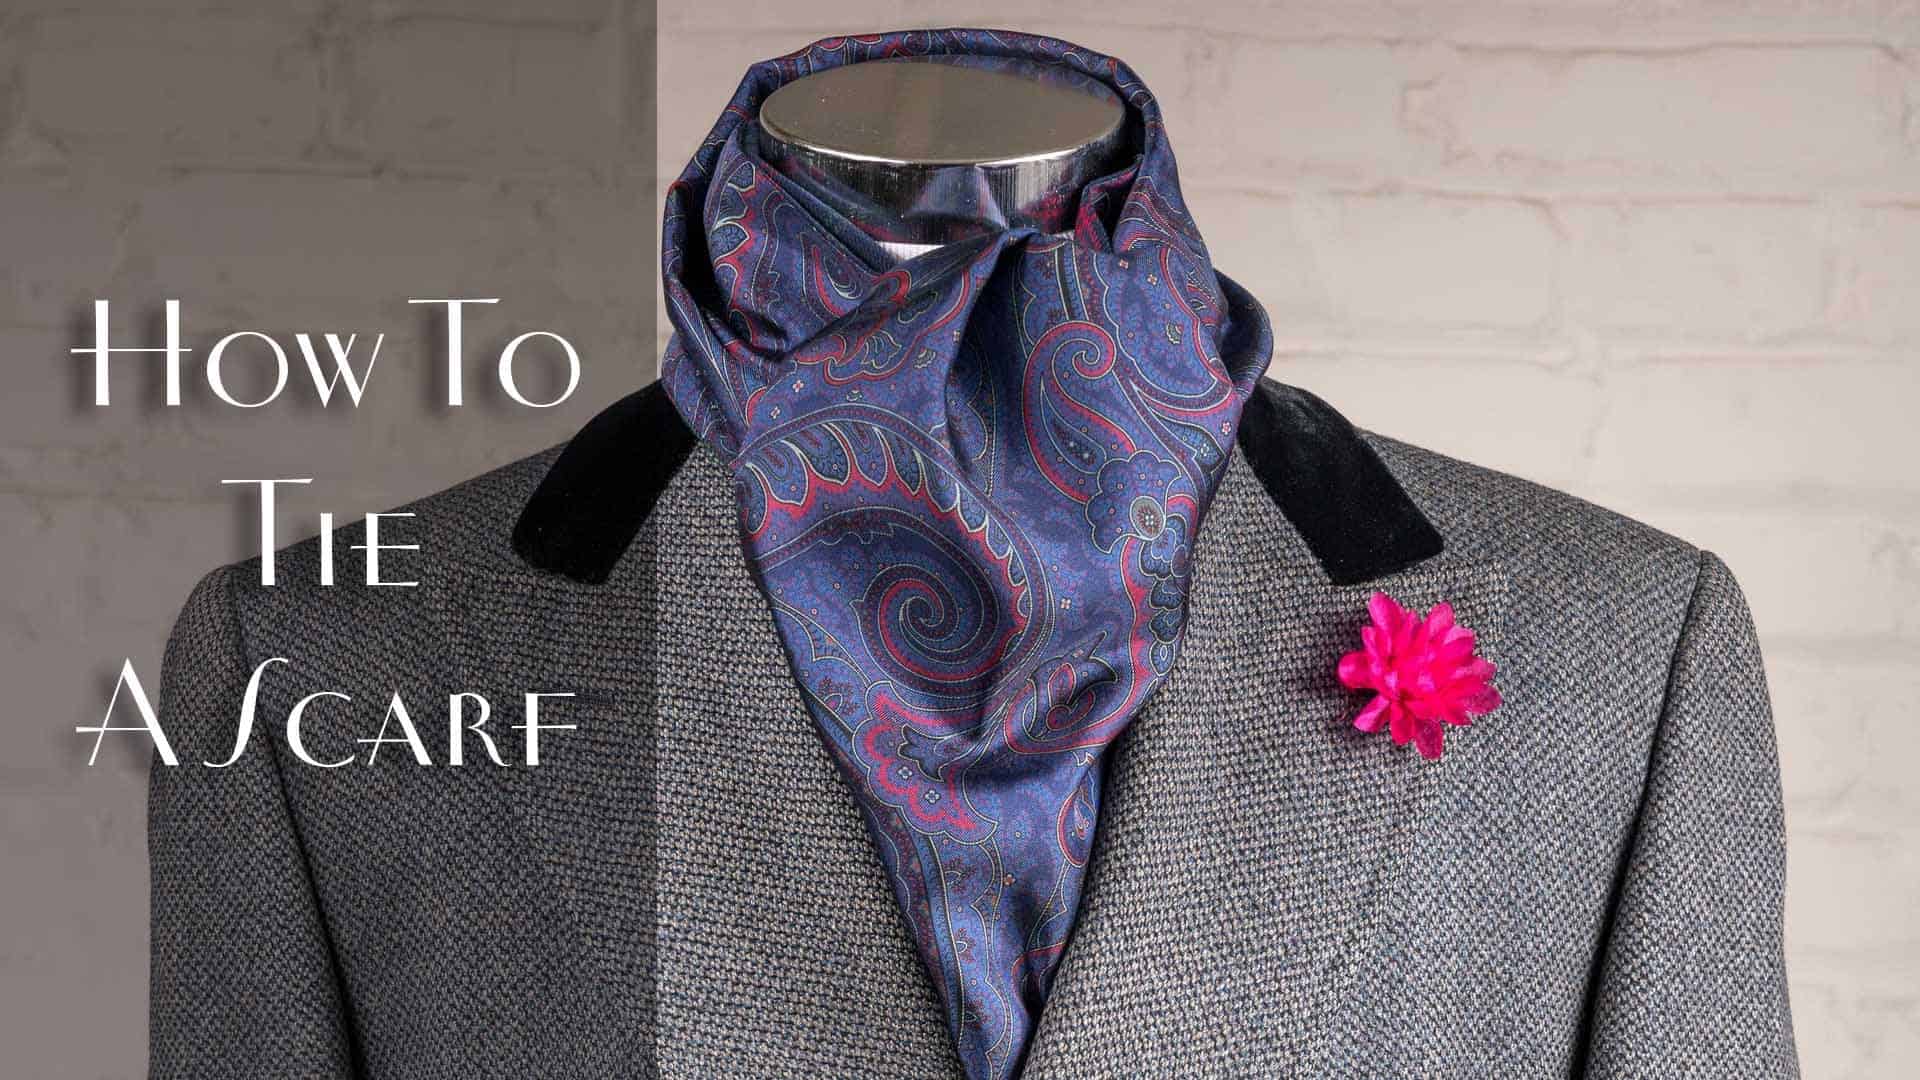 How To Fold Scarf Cheapest Selling, Save 53% | jlcatj.gob.mx